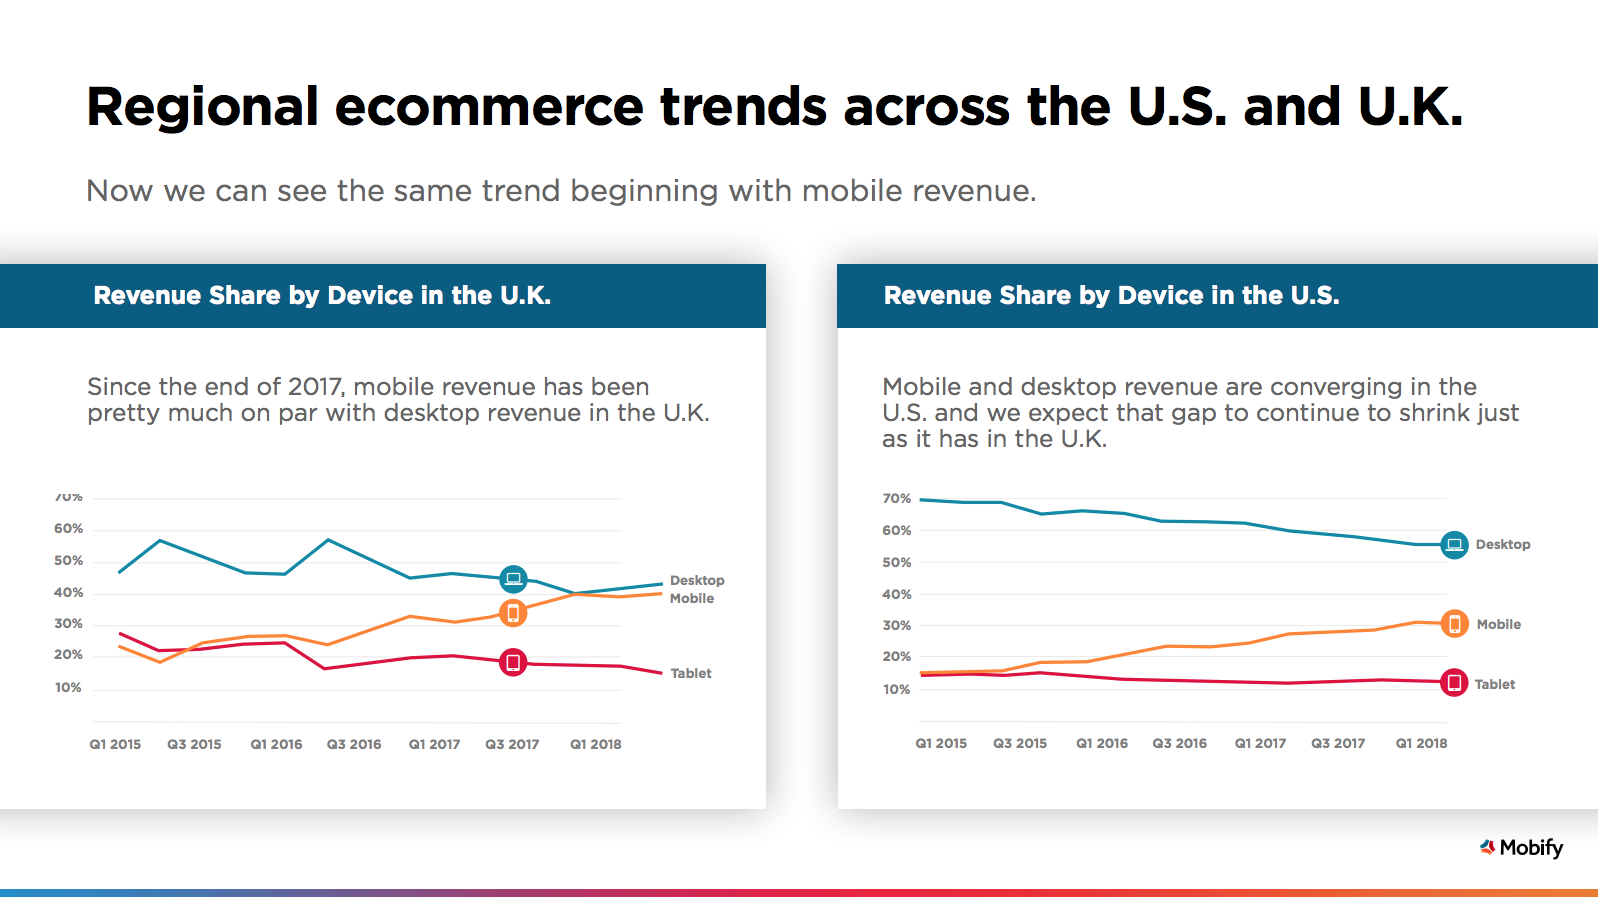 Mobile revenue trend in U.S. and U.K. showing parallels